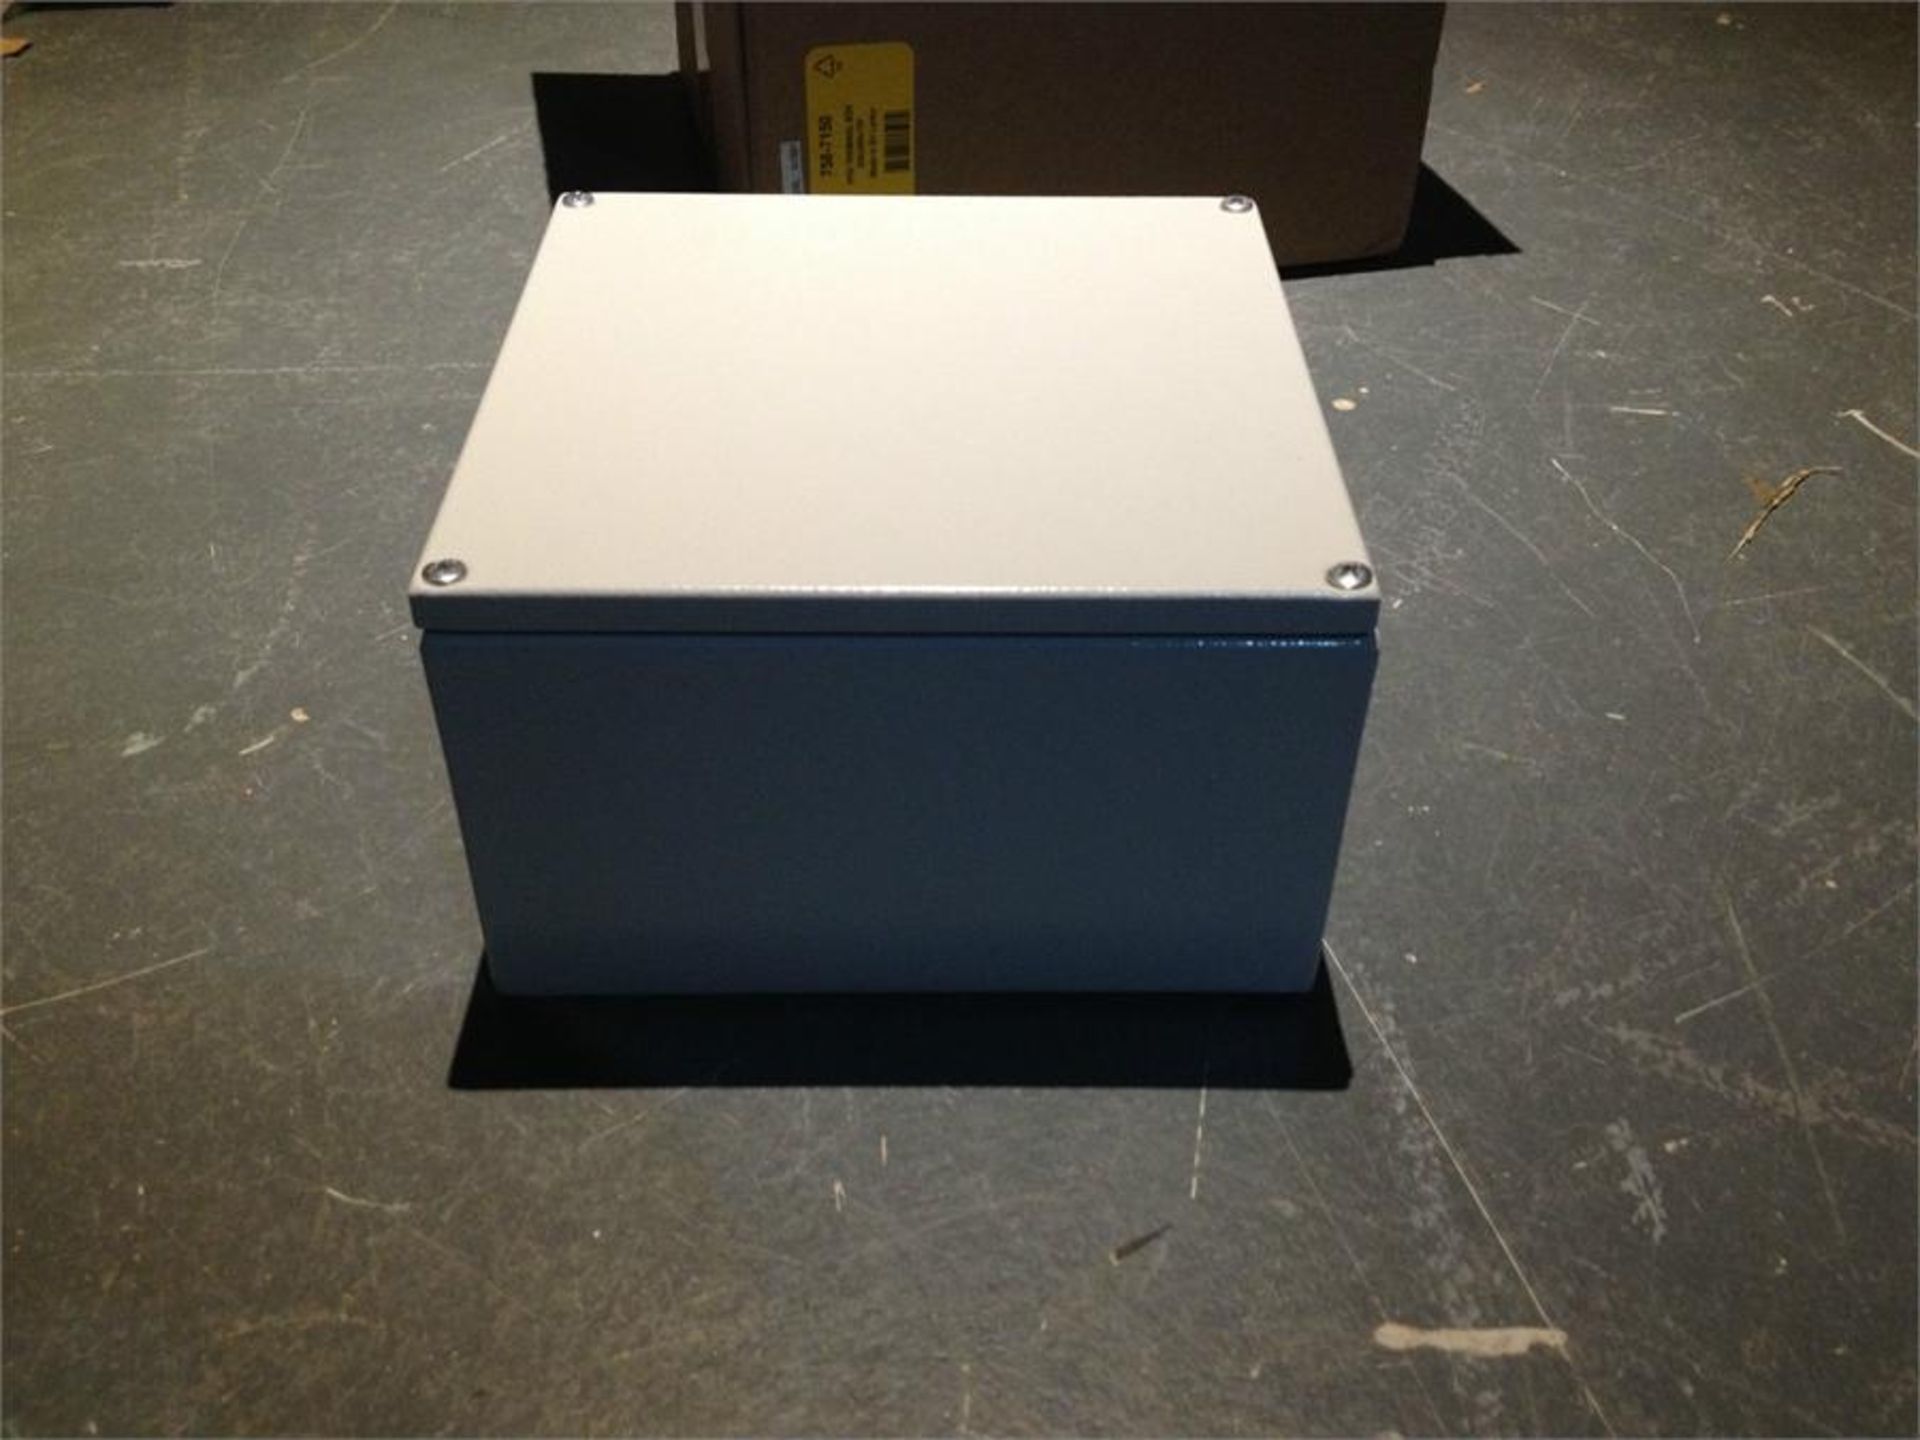 4 x IP55 Electrical Junction Box 200mmx200mmx120mm